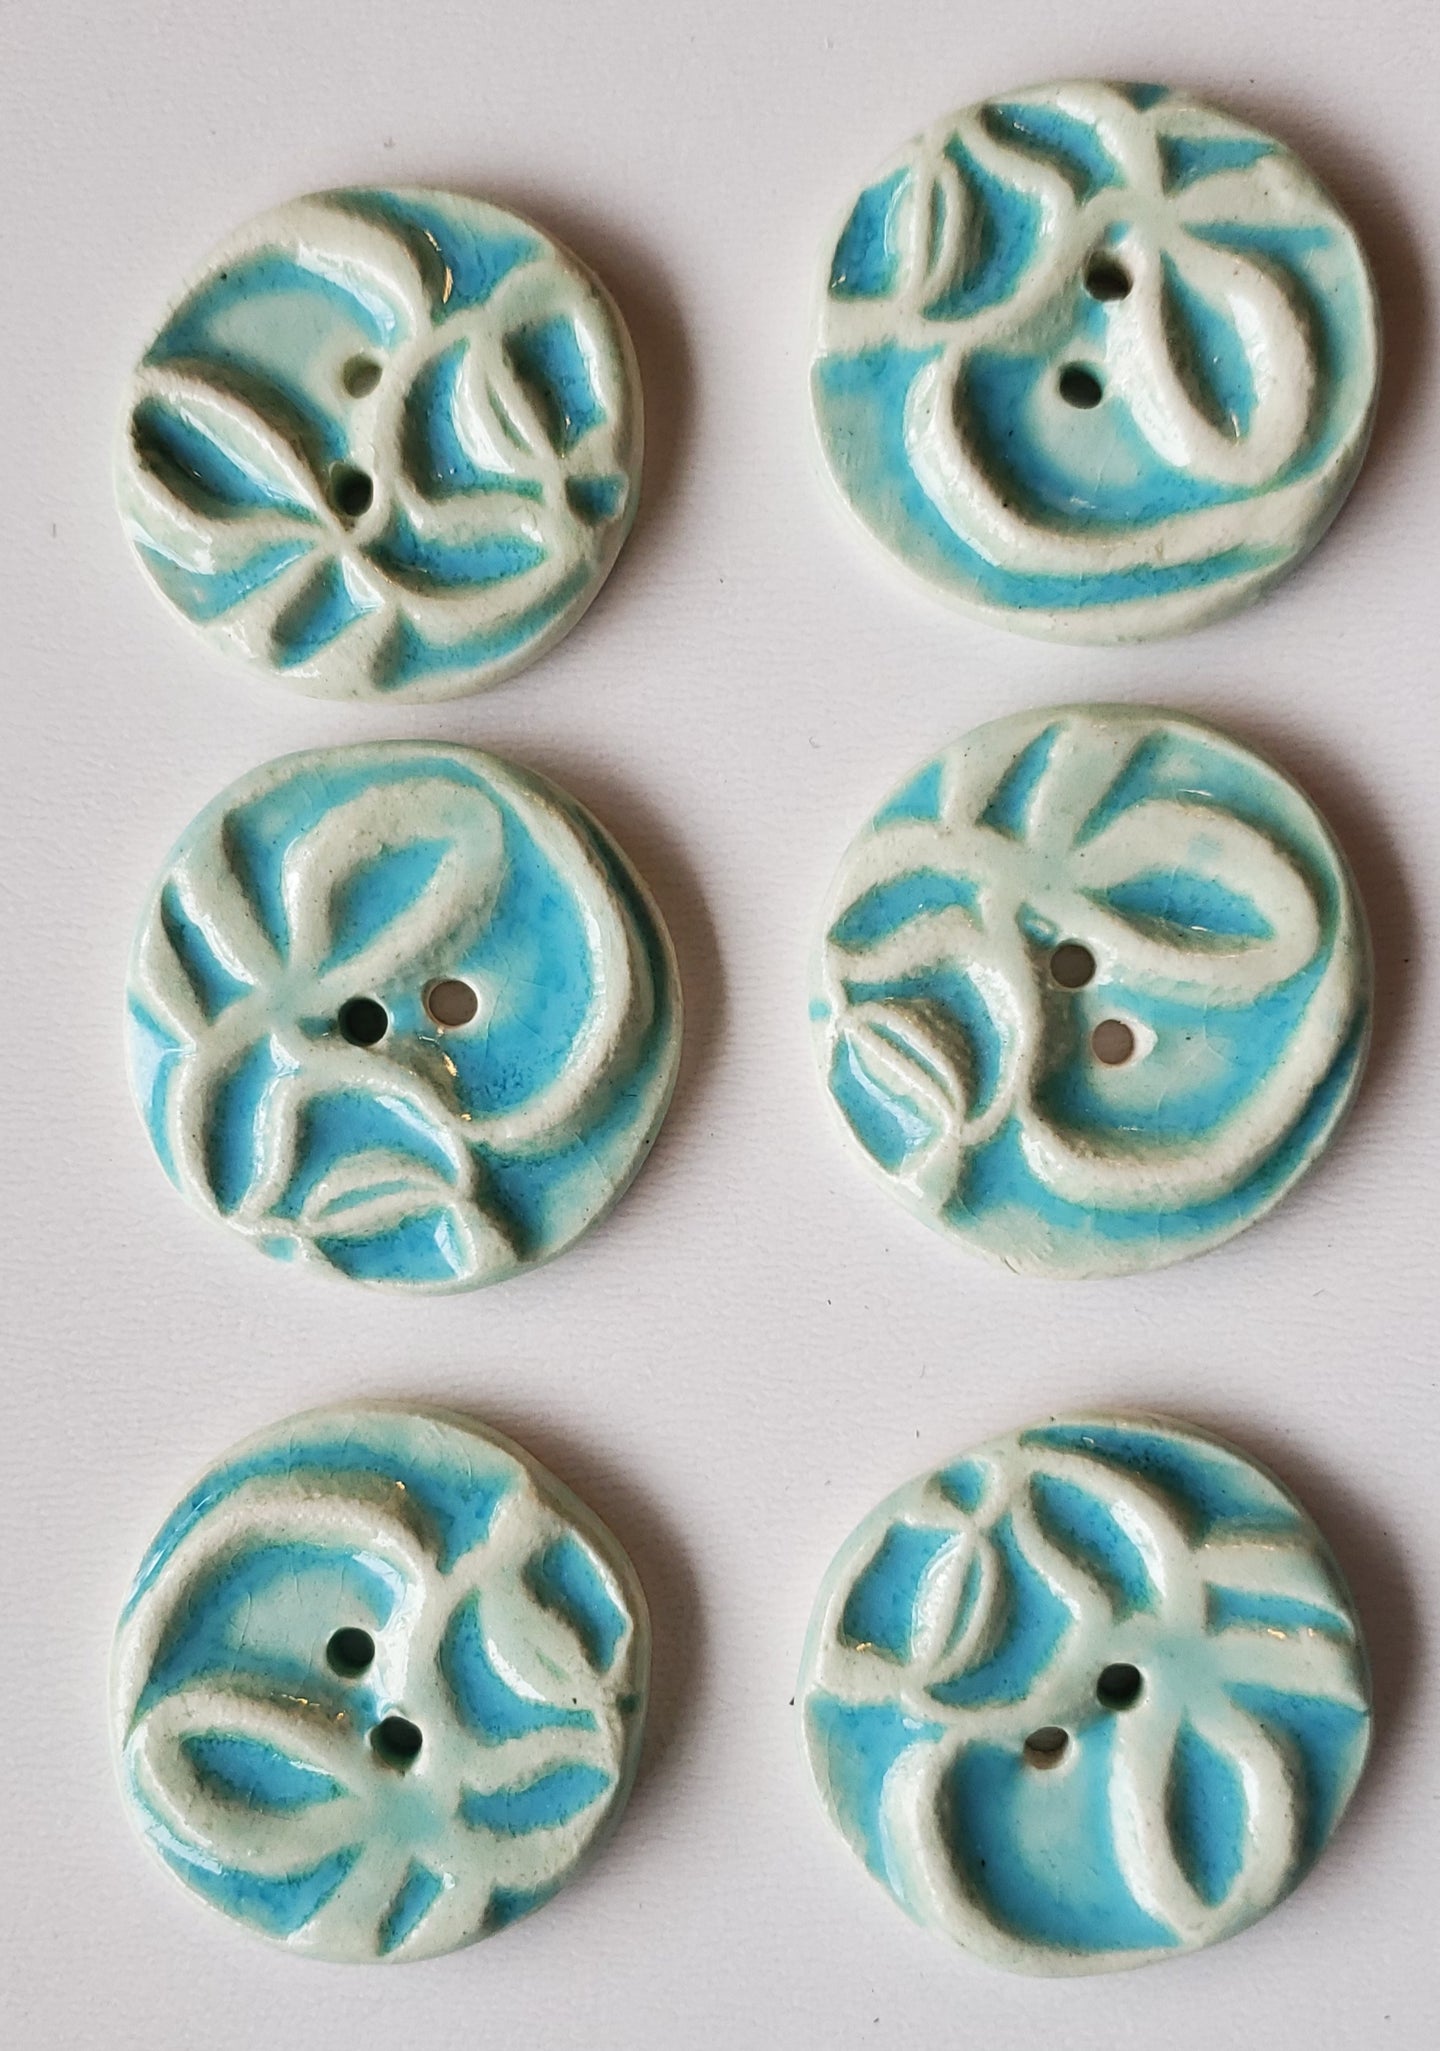 6  1 inch hand made ceramic buttons turquoise